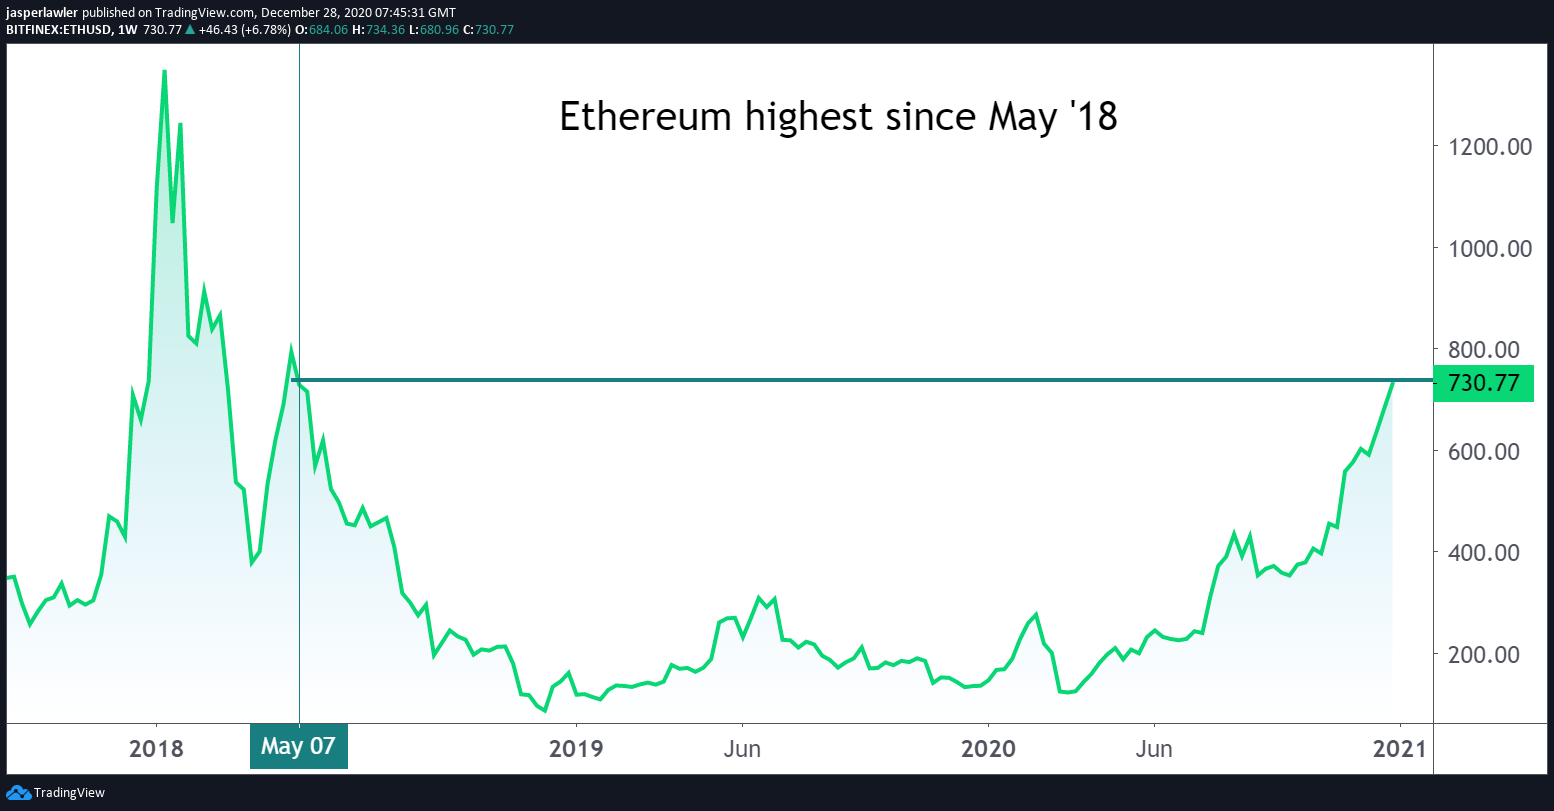 Ethereum spikes to new 2020 high - highest since May '18